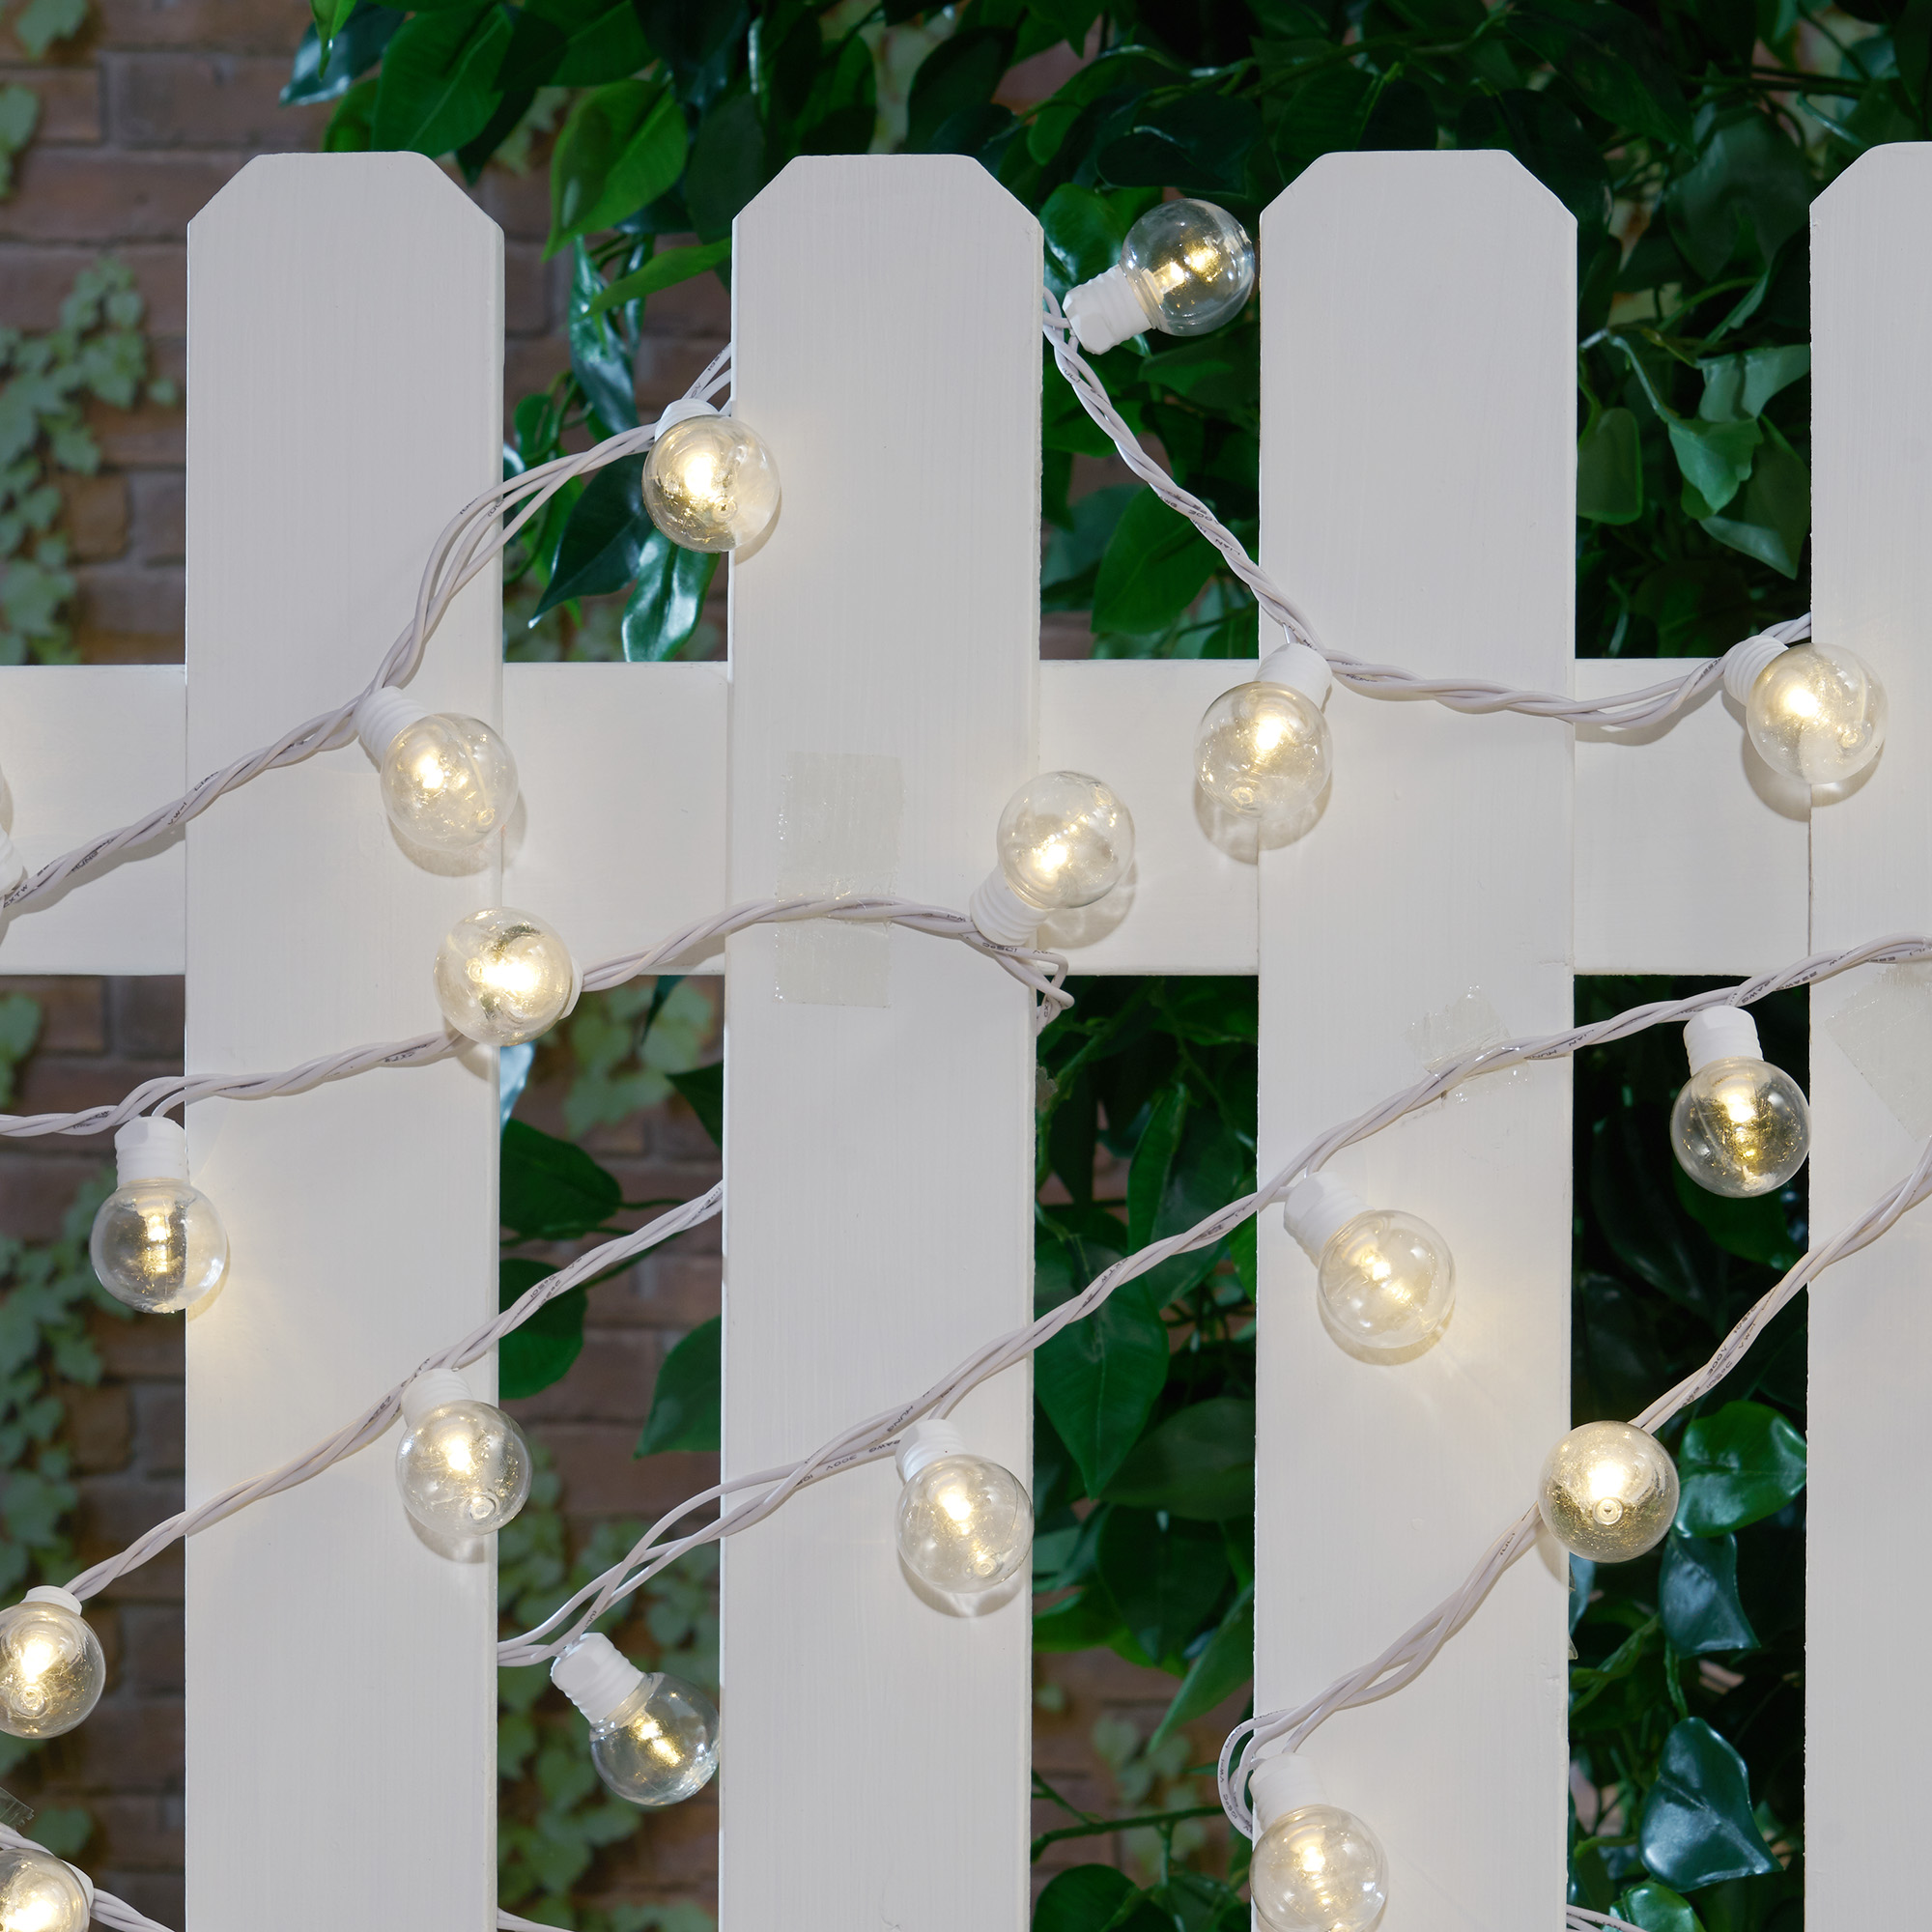 Mainstays 100-Count Plastic LED Globe Outdoor String Lights - image 4 of 9